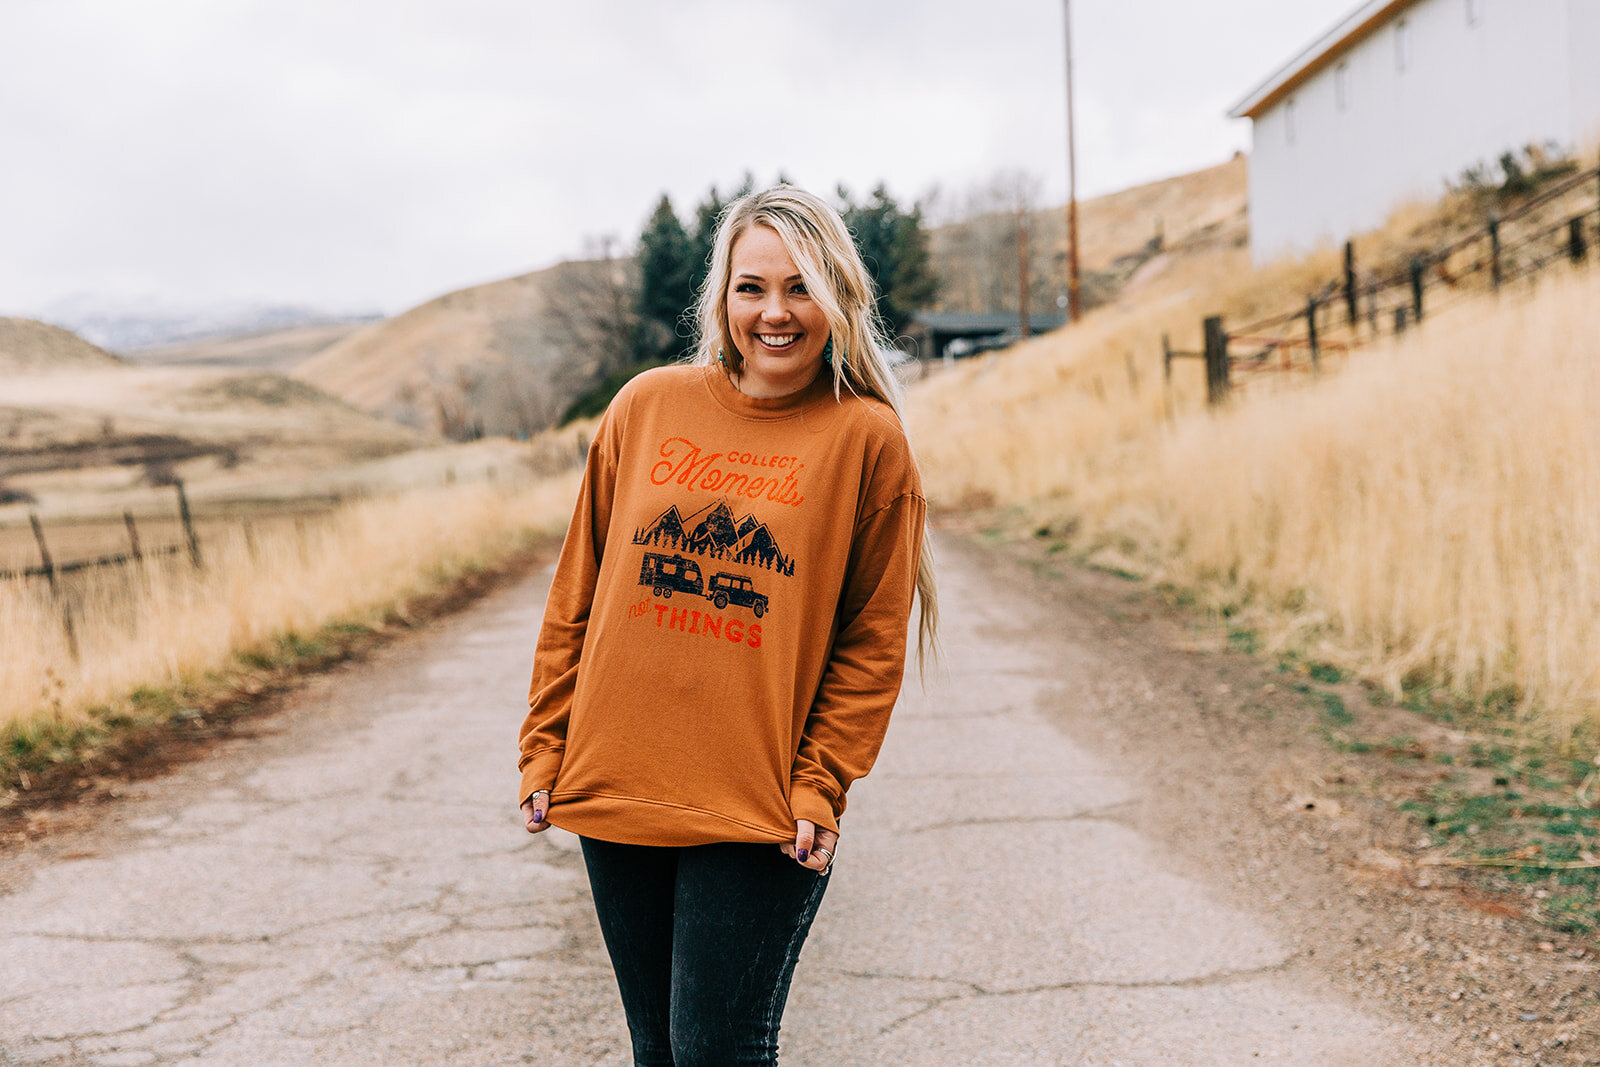  orange sweatshirt camping shirt collect moments not things travel long hairstyles hair and makeup inspiration country style professional photographers in utah commercial photographers in utah horses wild rag boutique commercial photography product p